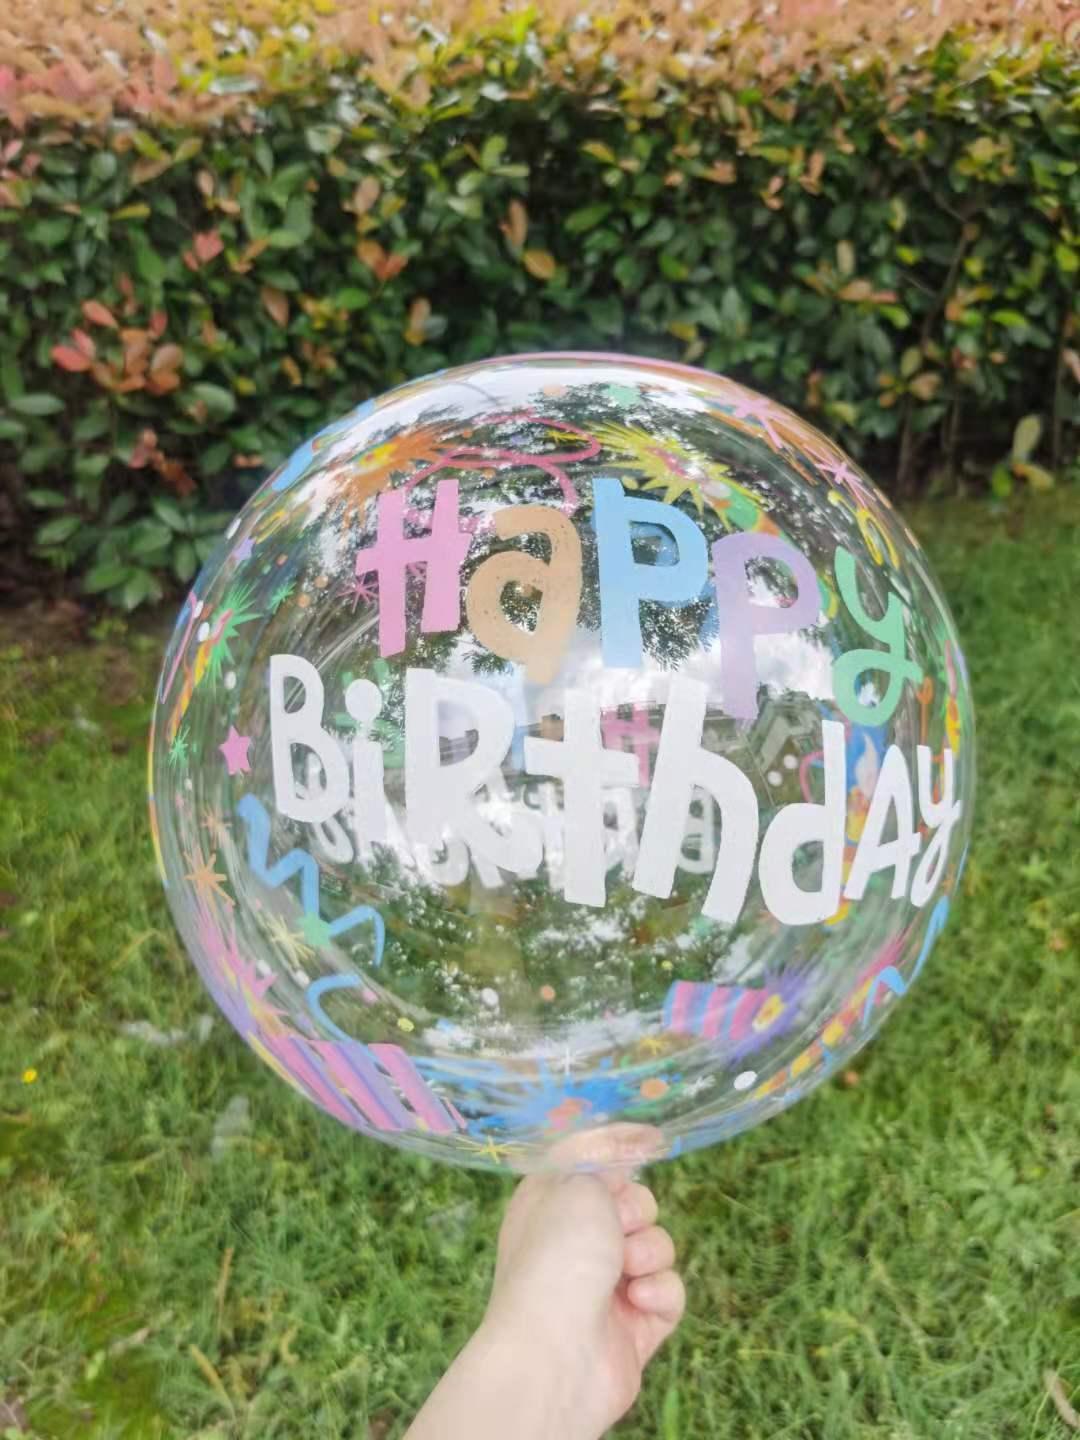 Printed Bobo Balloons for Parties - If you say i do